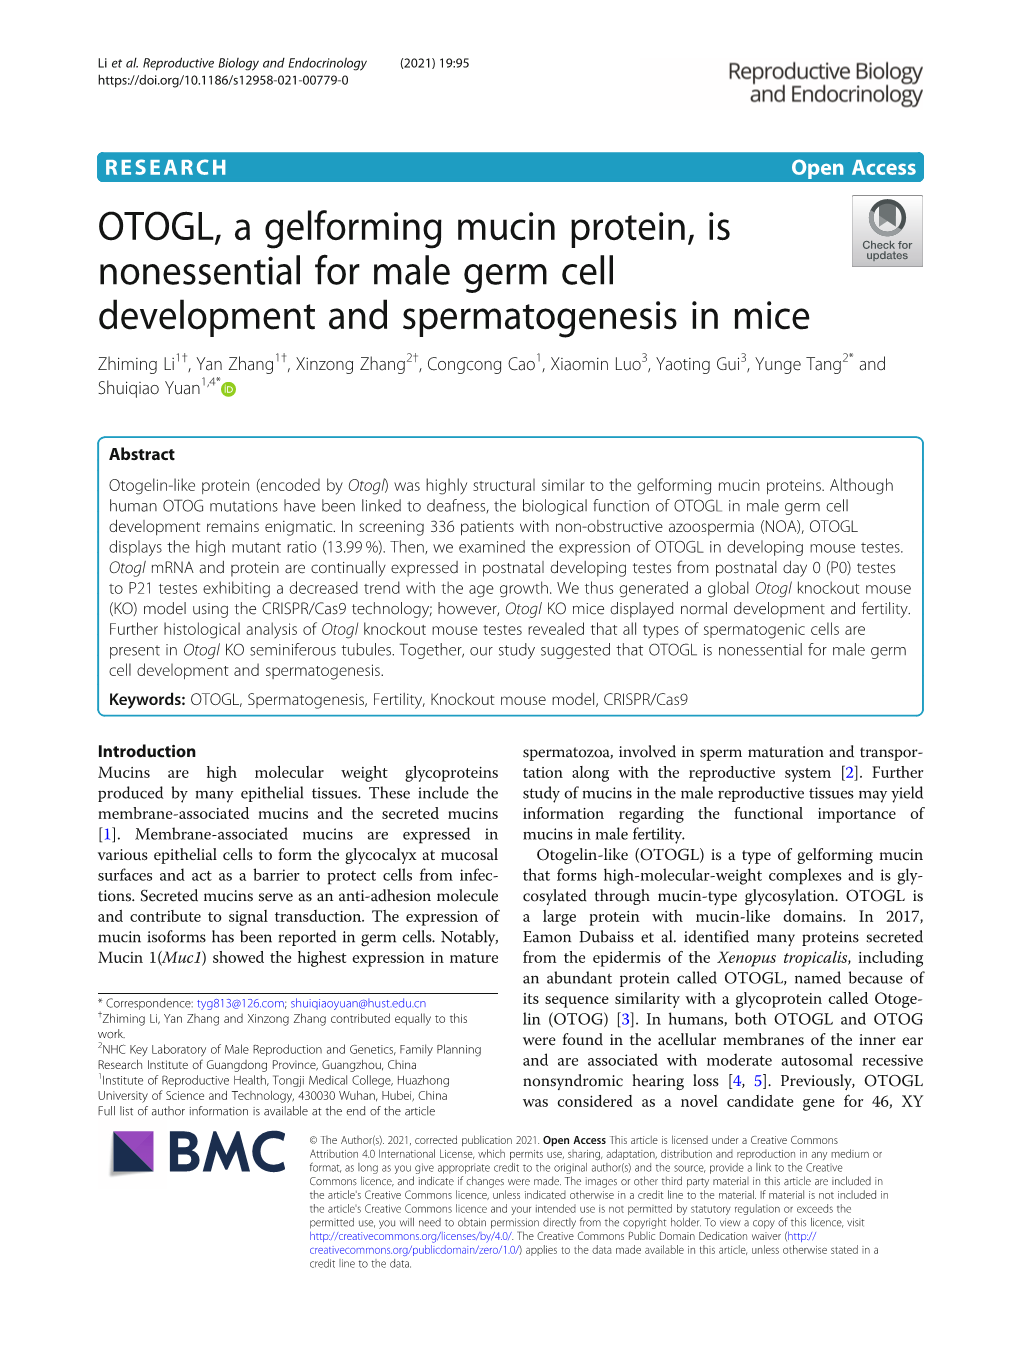 OTOGL, a Gelforming Mucin Protein, Is Nonessential for Male Germ Cell